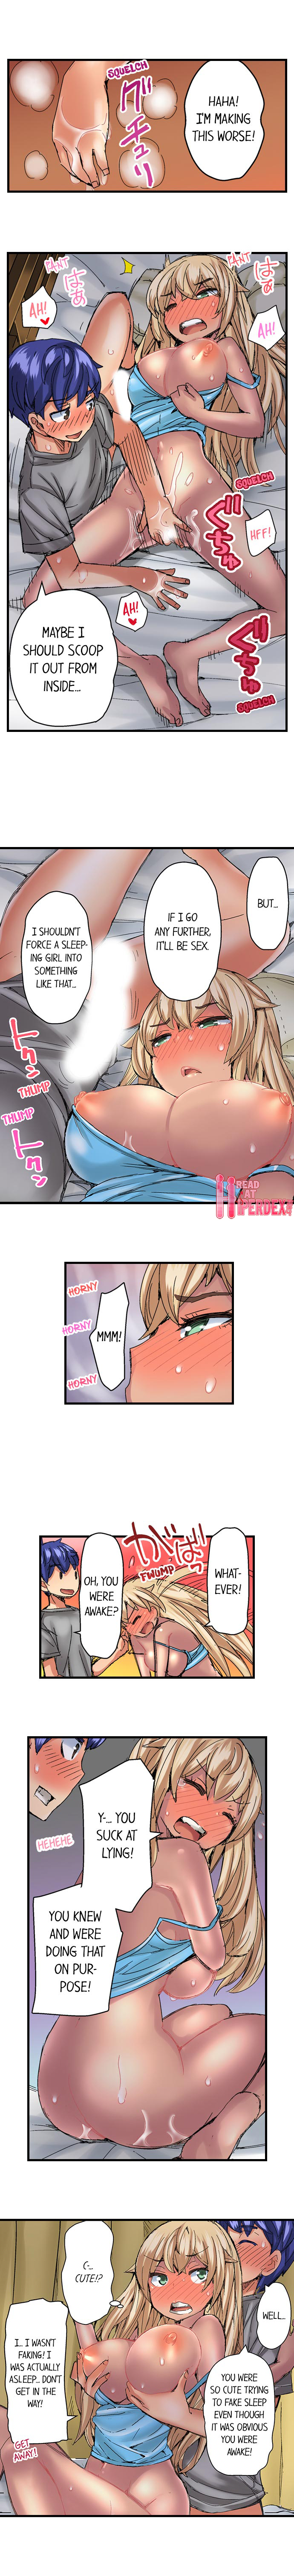 Taking a Hot Tanned Chick’s Virginity - Chapter 27 Page 6